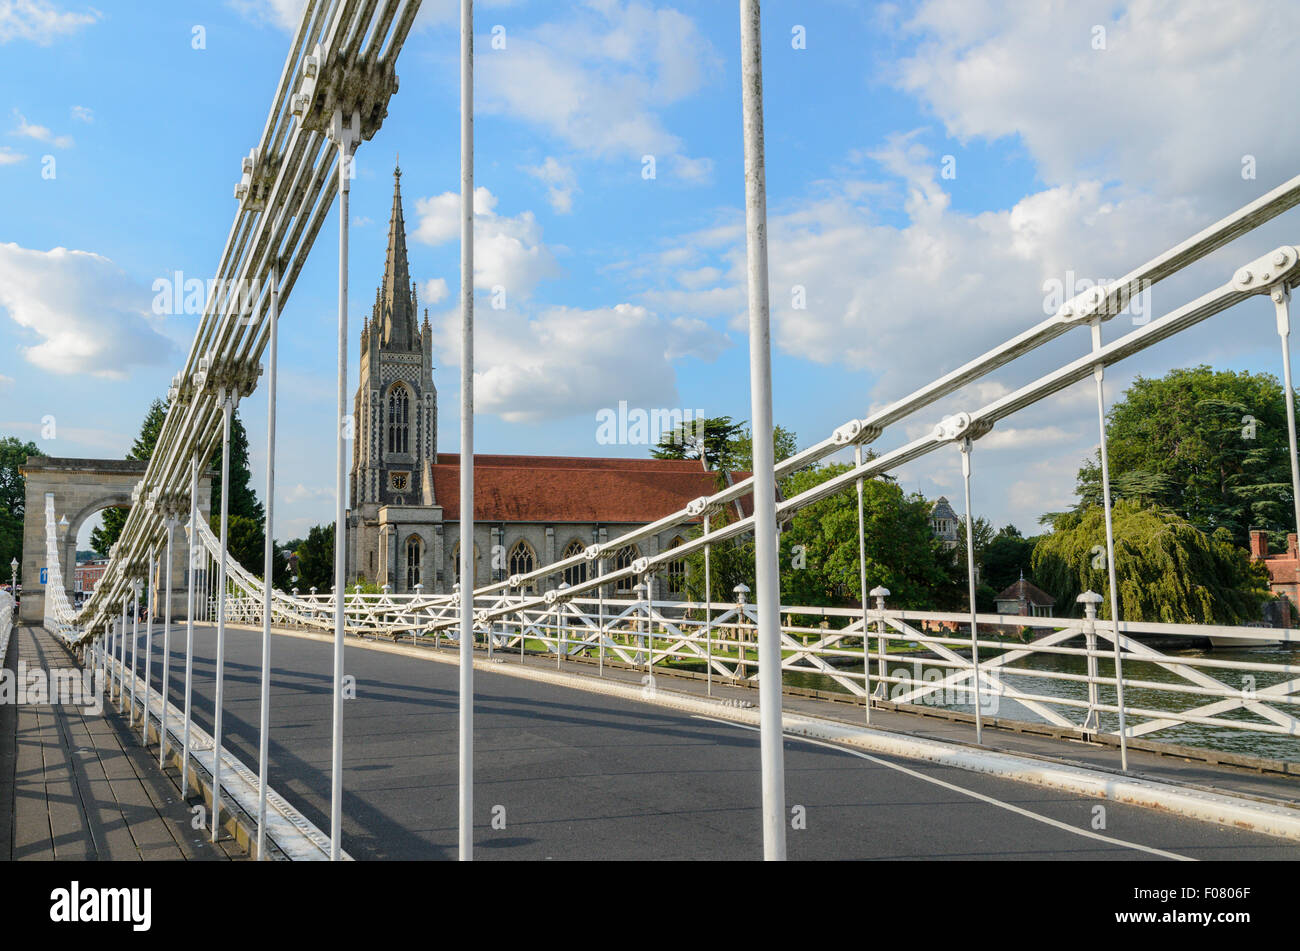 The Bridge over the River Thames at Marlow and All Saints Church, Marlow,Buckinghamshire, England, UK. Stock Photo